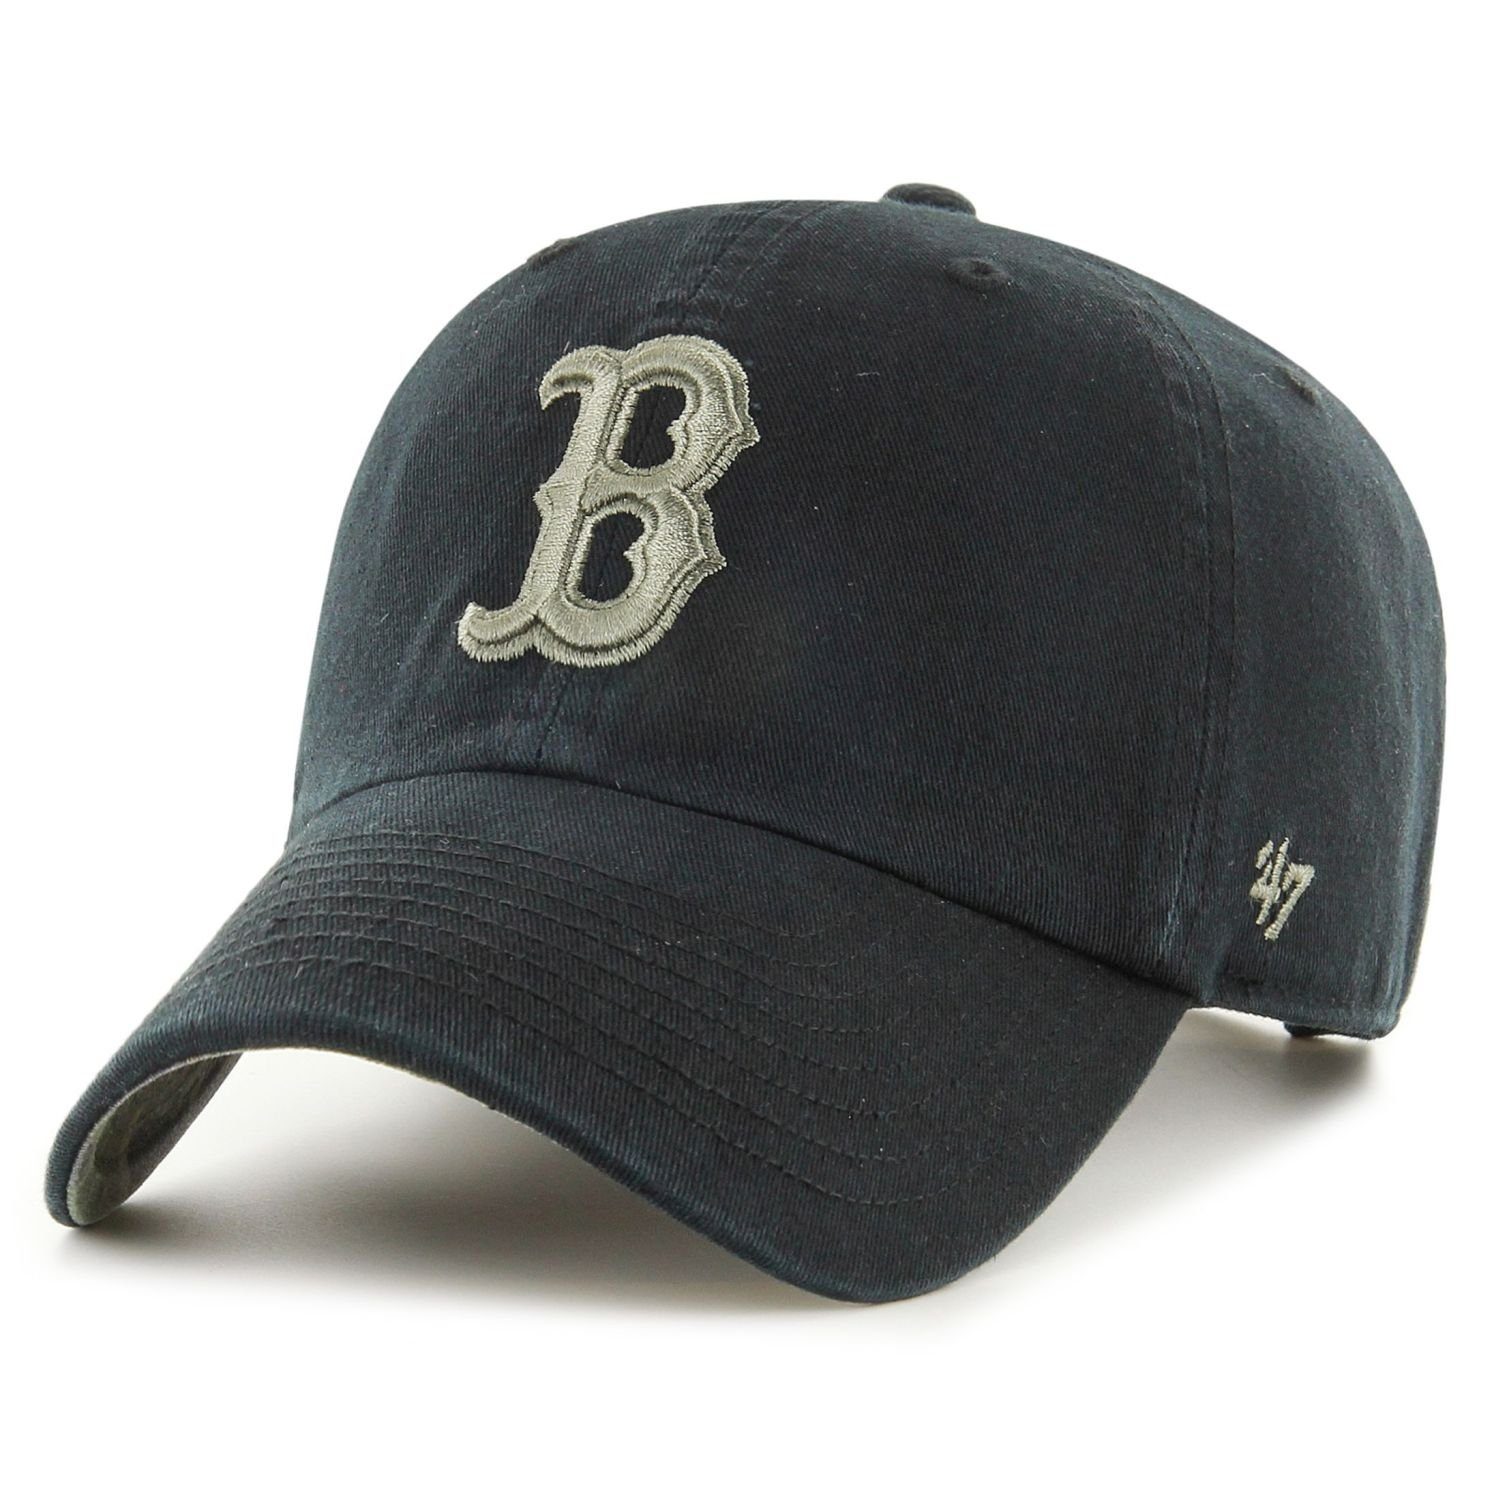 UP Cap Fit Relaxed Trucker Sox Boston Brand CLEAN '47 Red